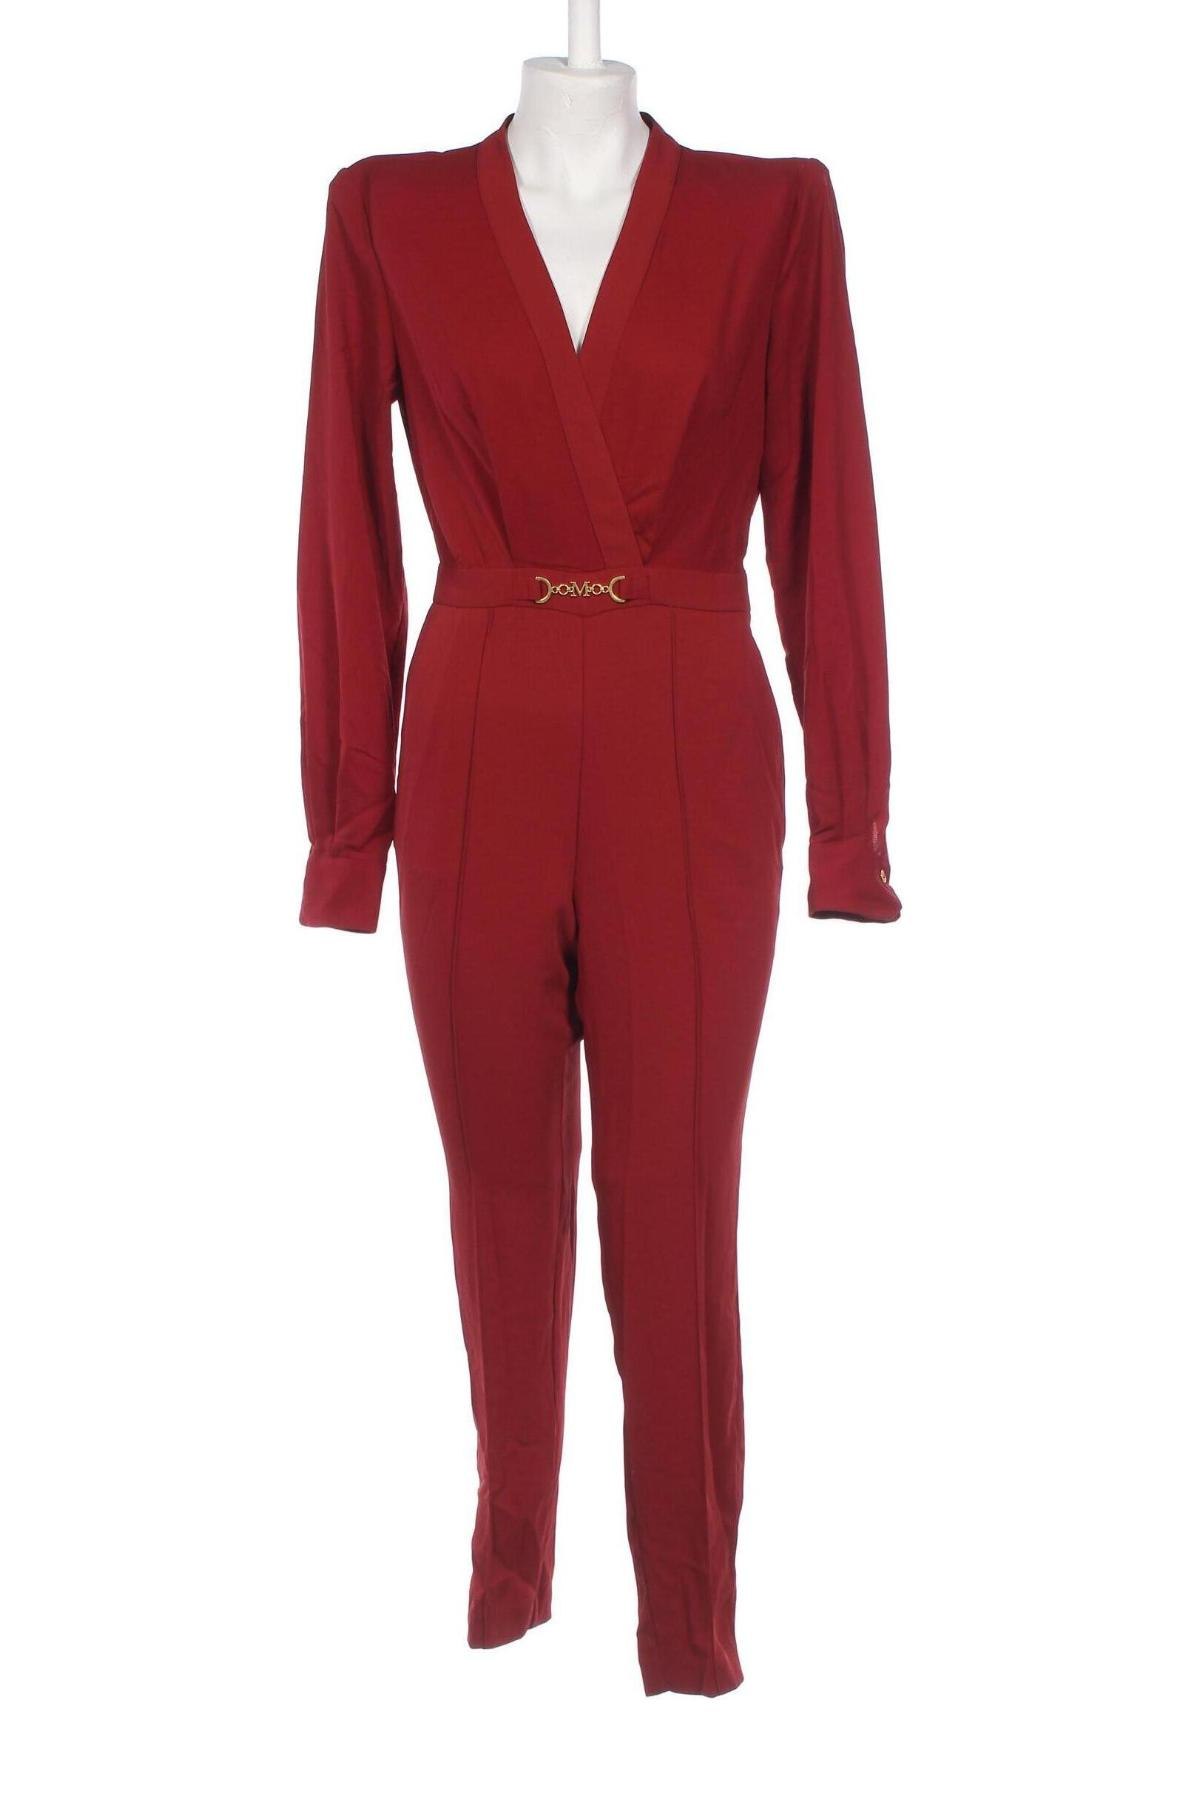 Damen Overall Marciano by Guess, Größe M, Farbe Rot, Preis € 112,89